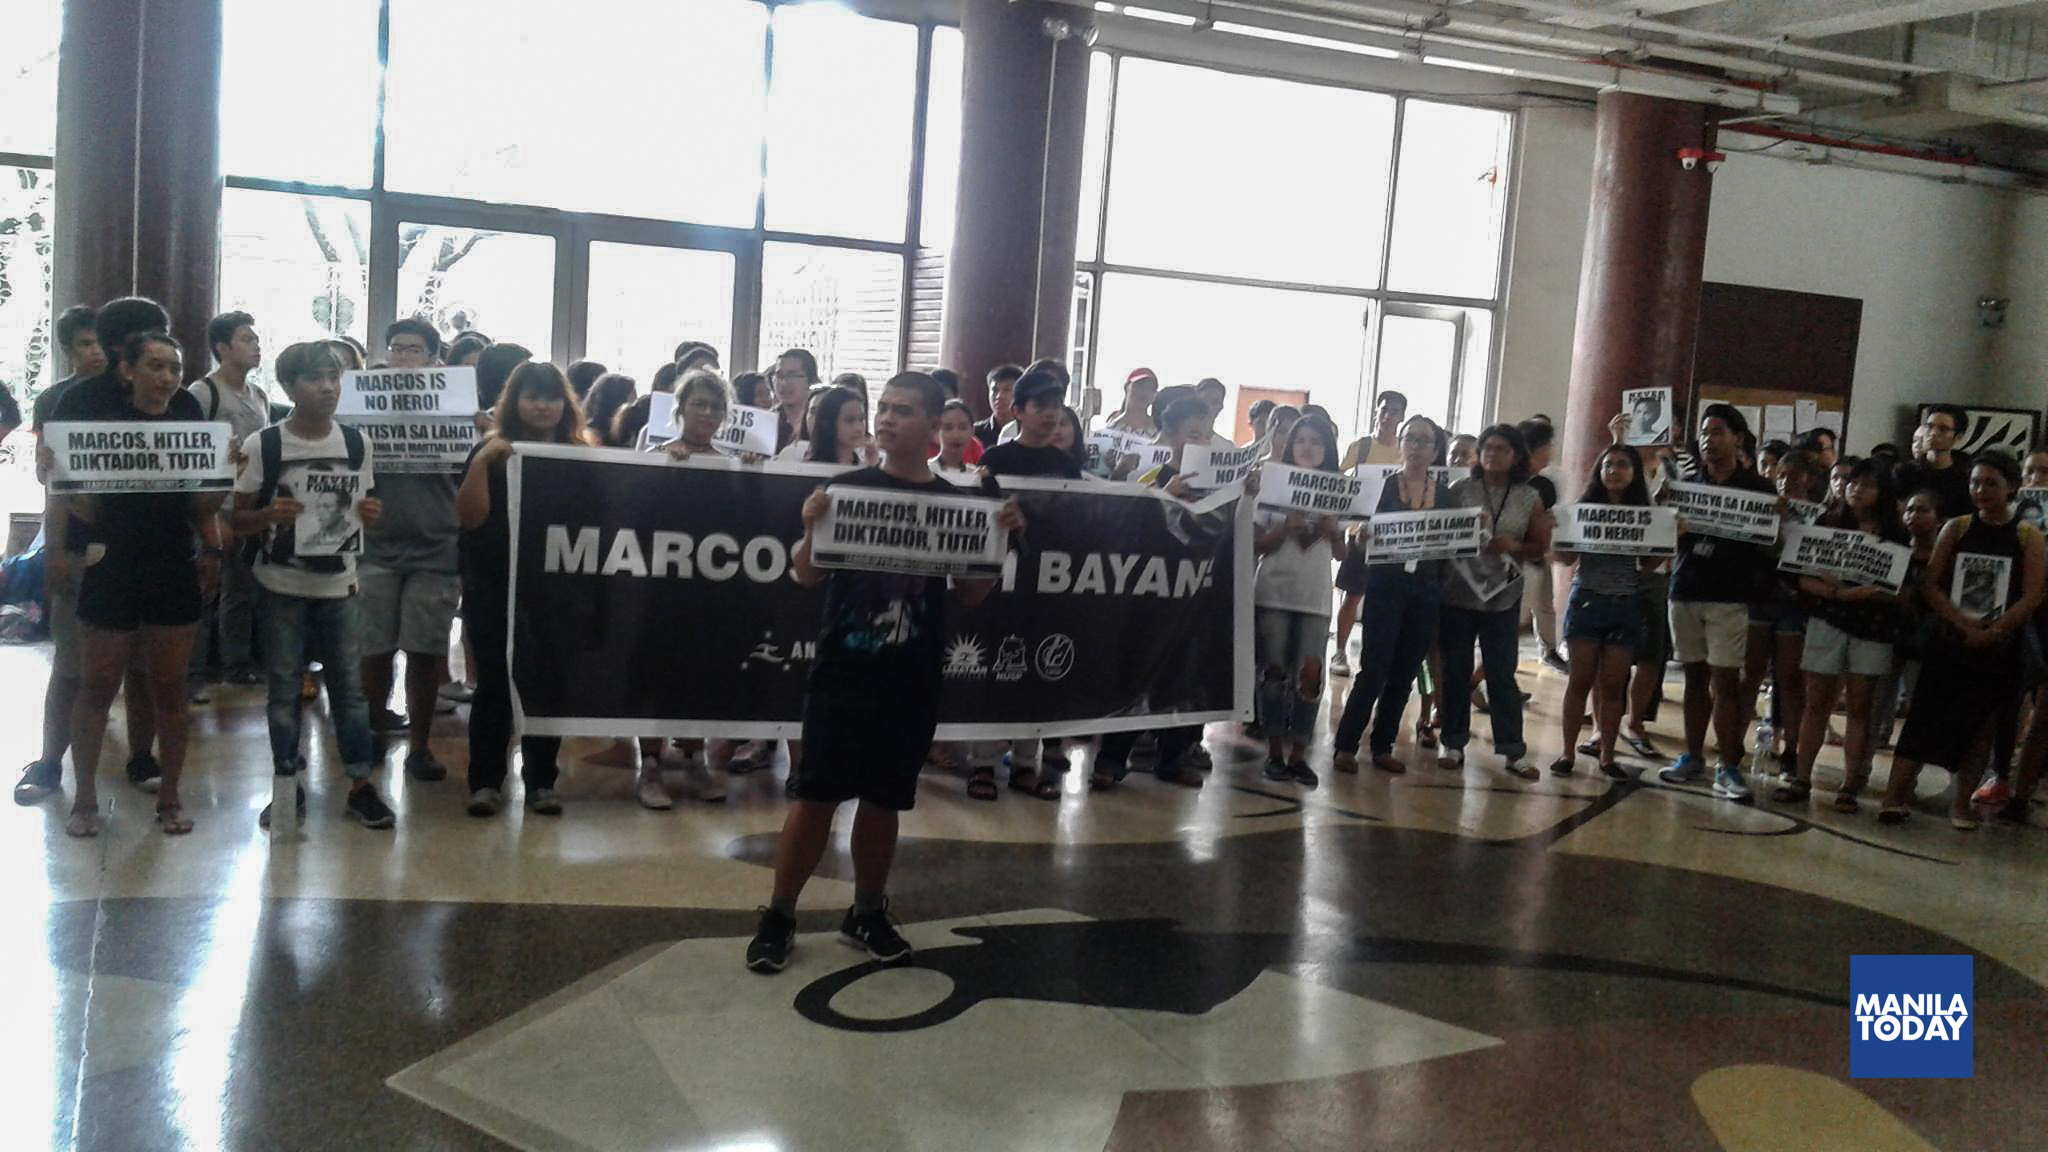 UP Diliman students gathered at Palma Hall today to protest hero's honor given by the state to Marcos.